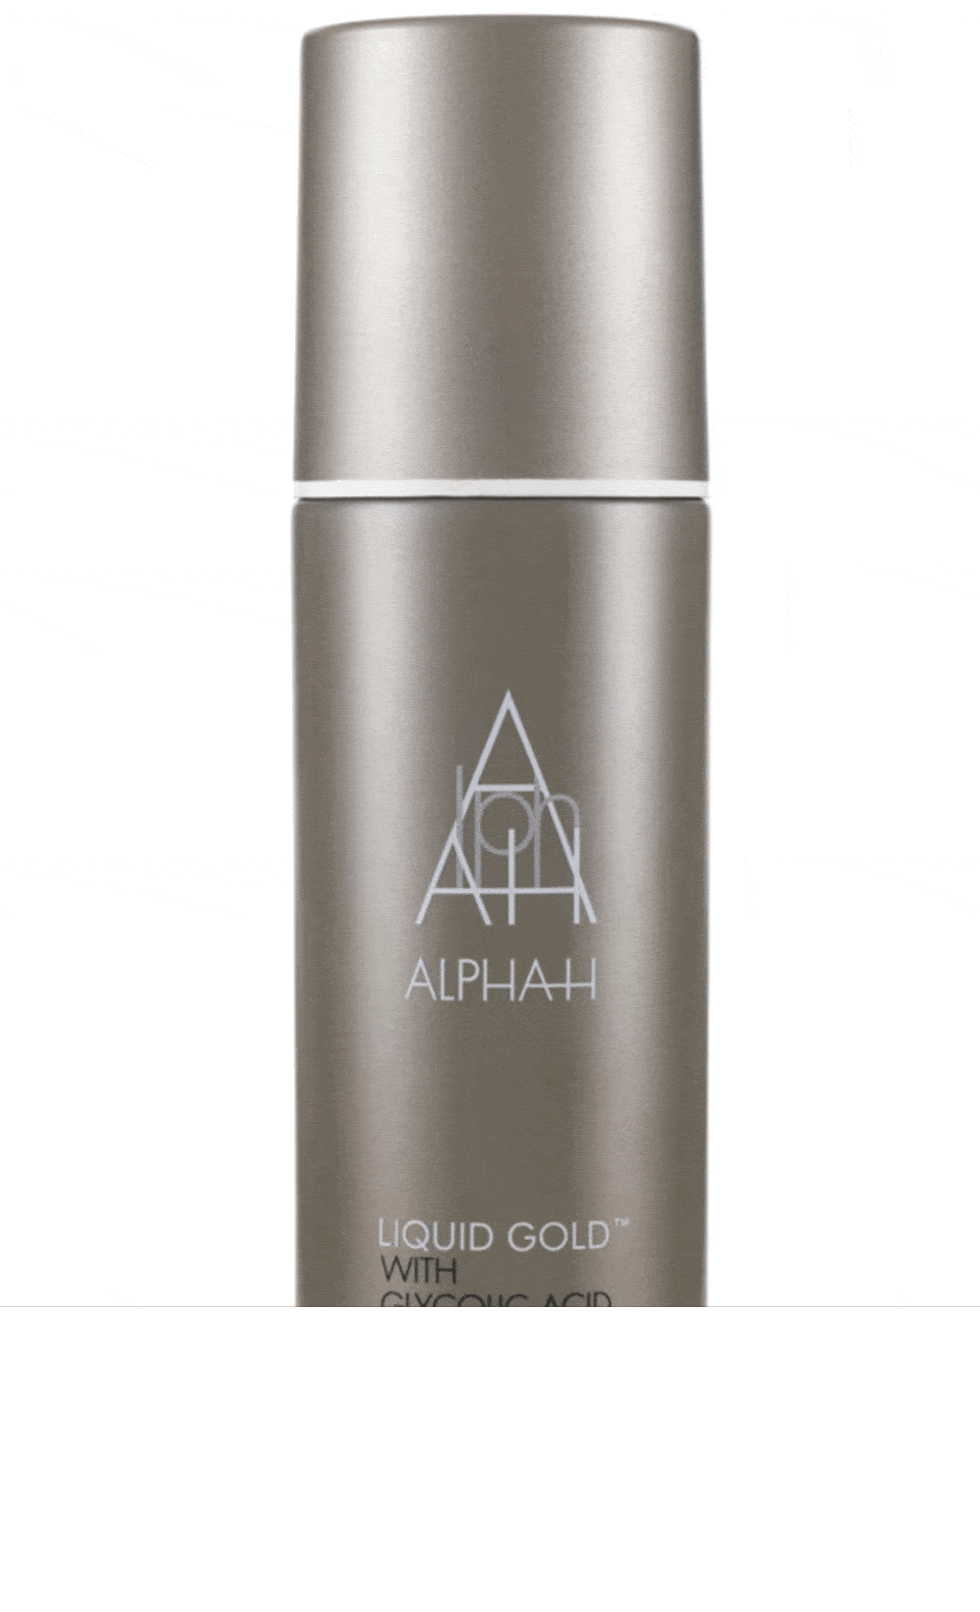 <p>Alpha H&nbsp;</p>

<p>If you suffer from acne or pigmentation issues, this collection will sort your skin out. Operated and manufactured on the Gold Coast in Queensland, every product within this brand&#39;s portfolio focusses on&nbsp;rejuvenating and 